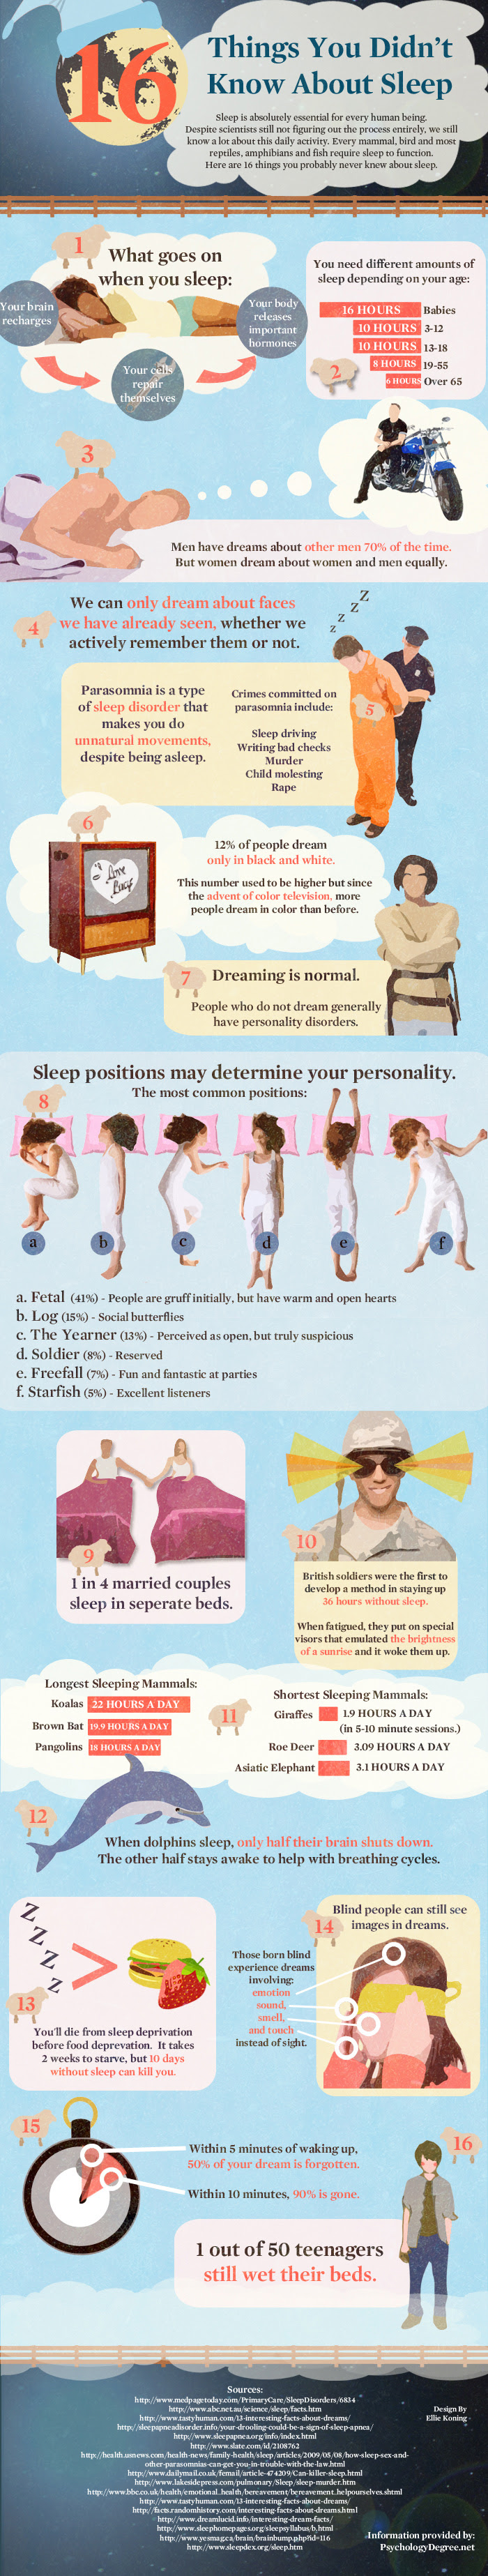 16 Things You Didn't Know About Sleep